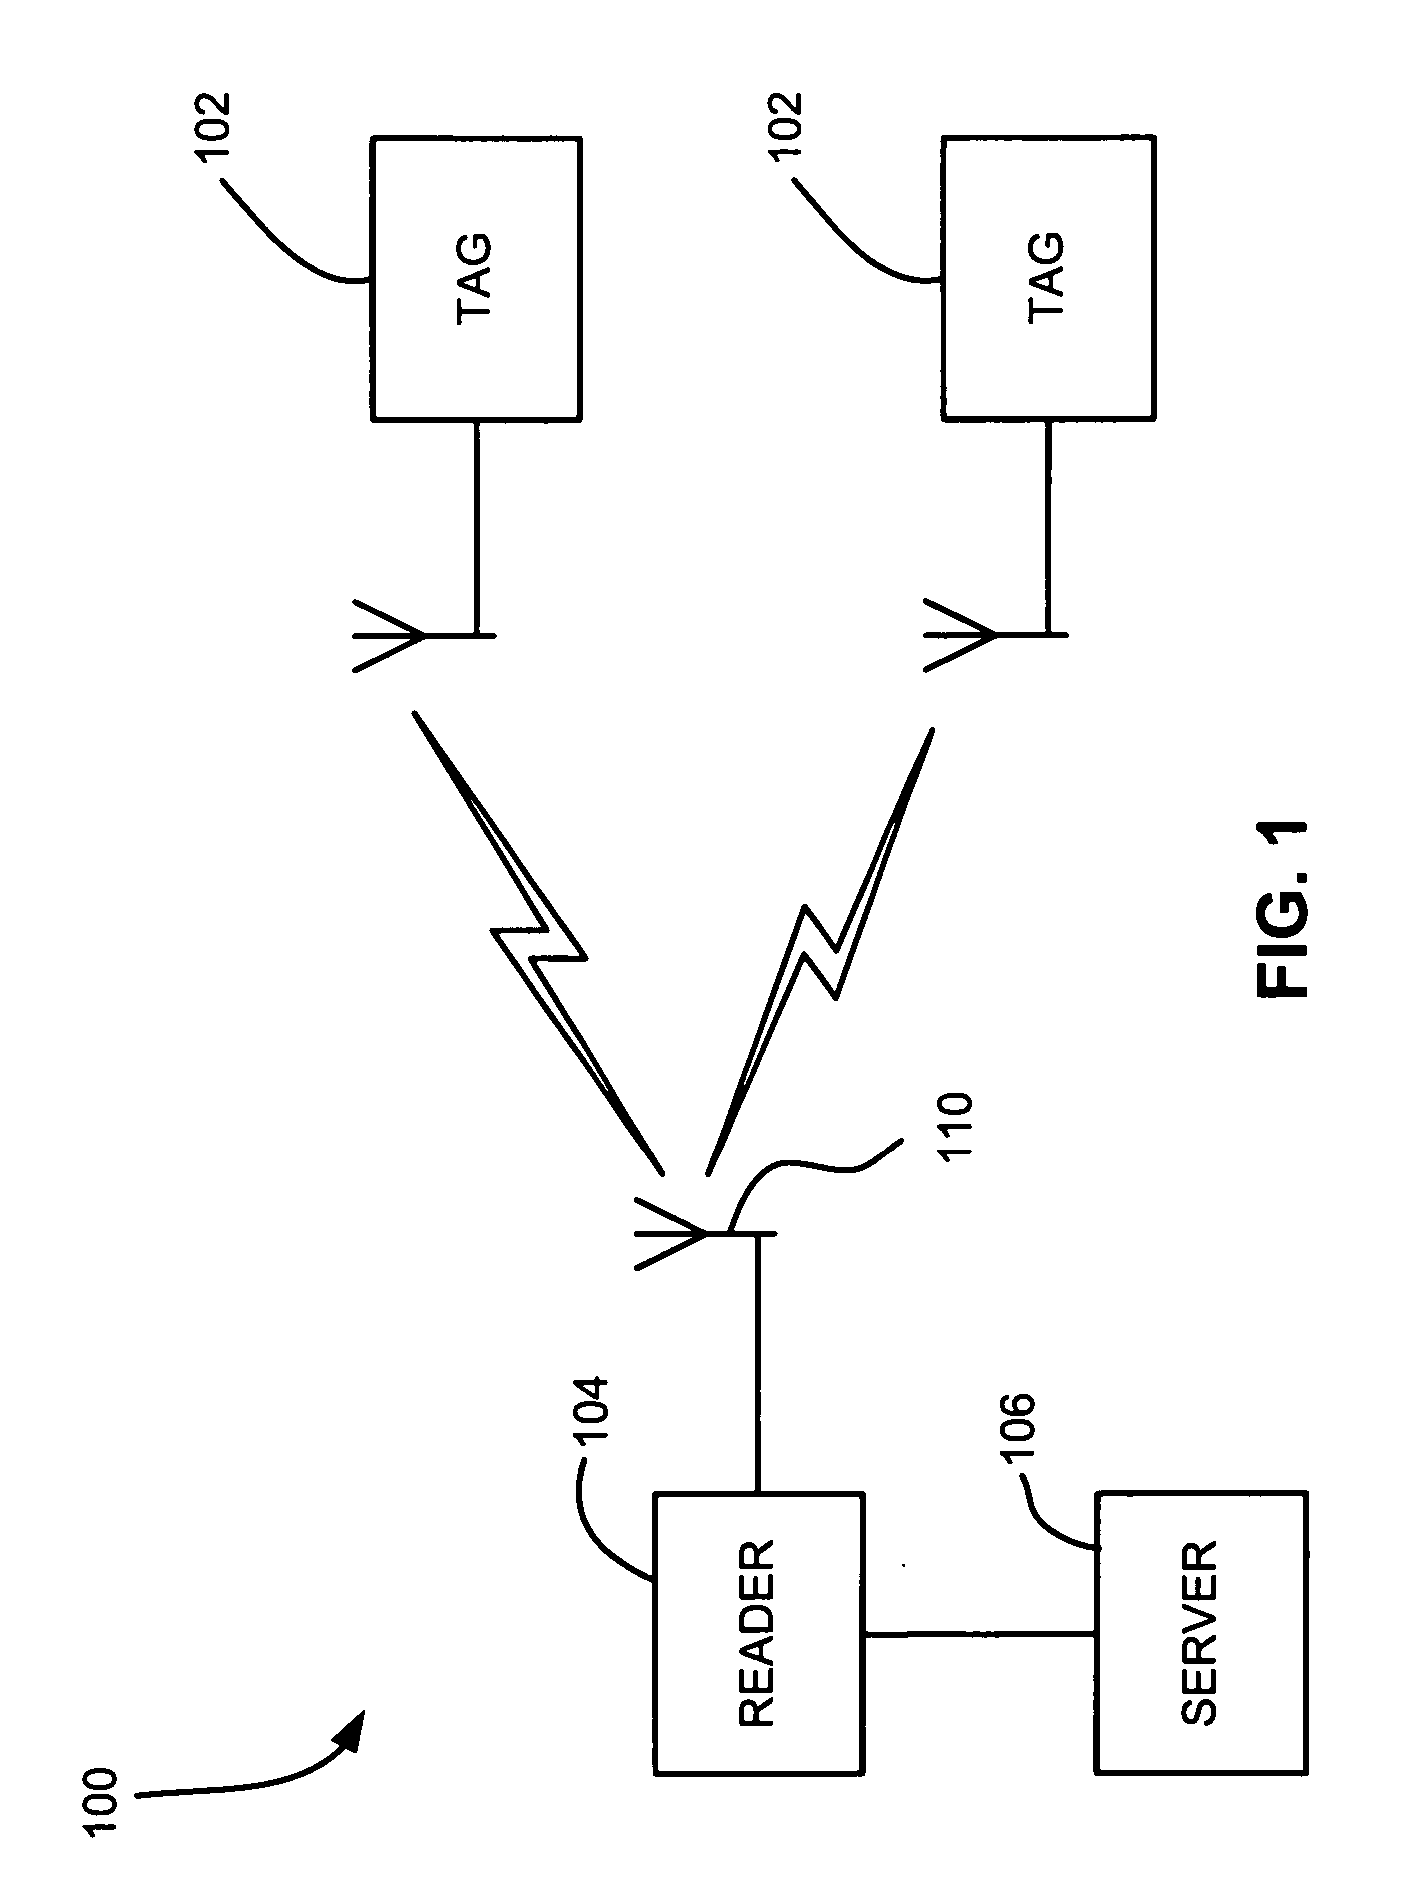 RFID reader with adjustable filtering and adaptive backscatter processing